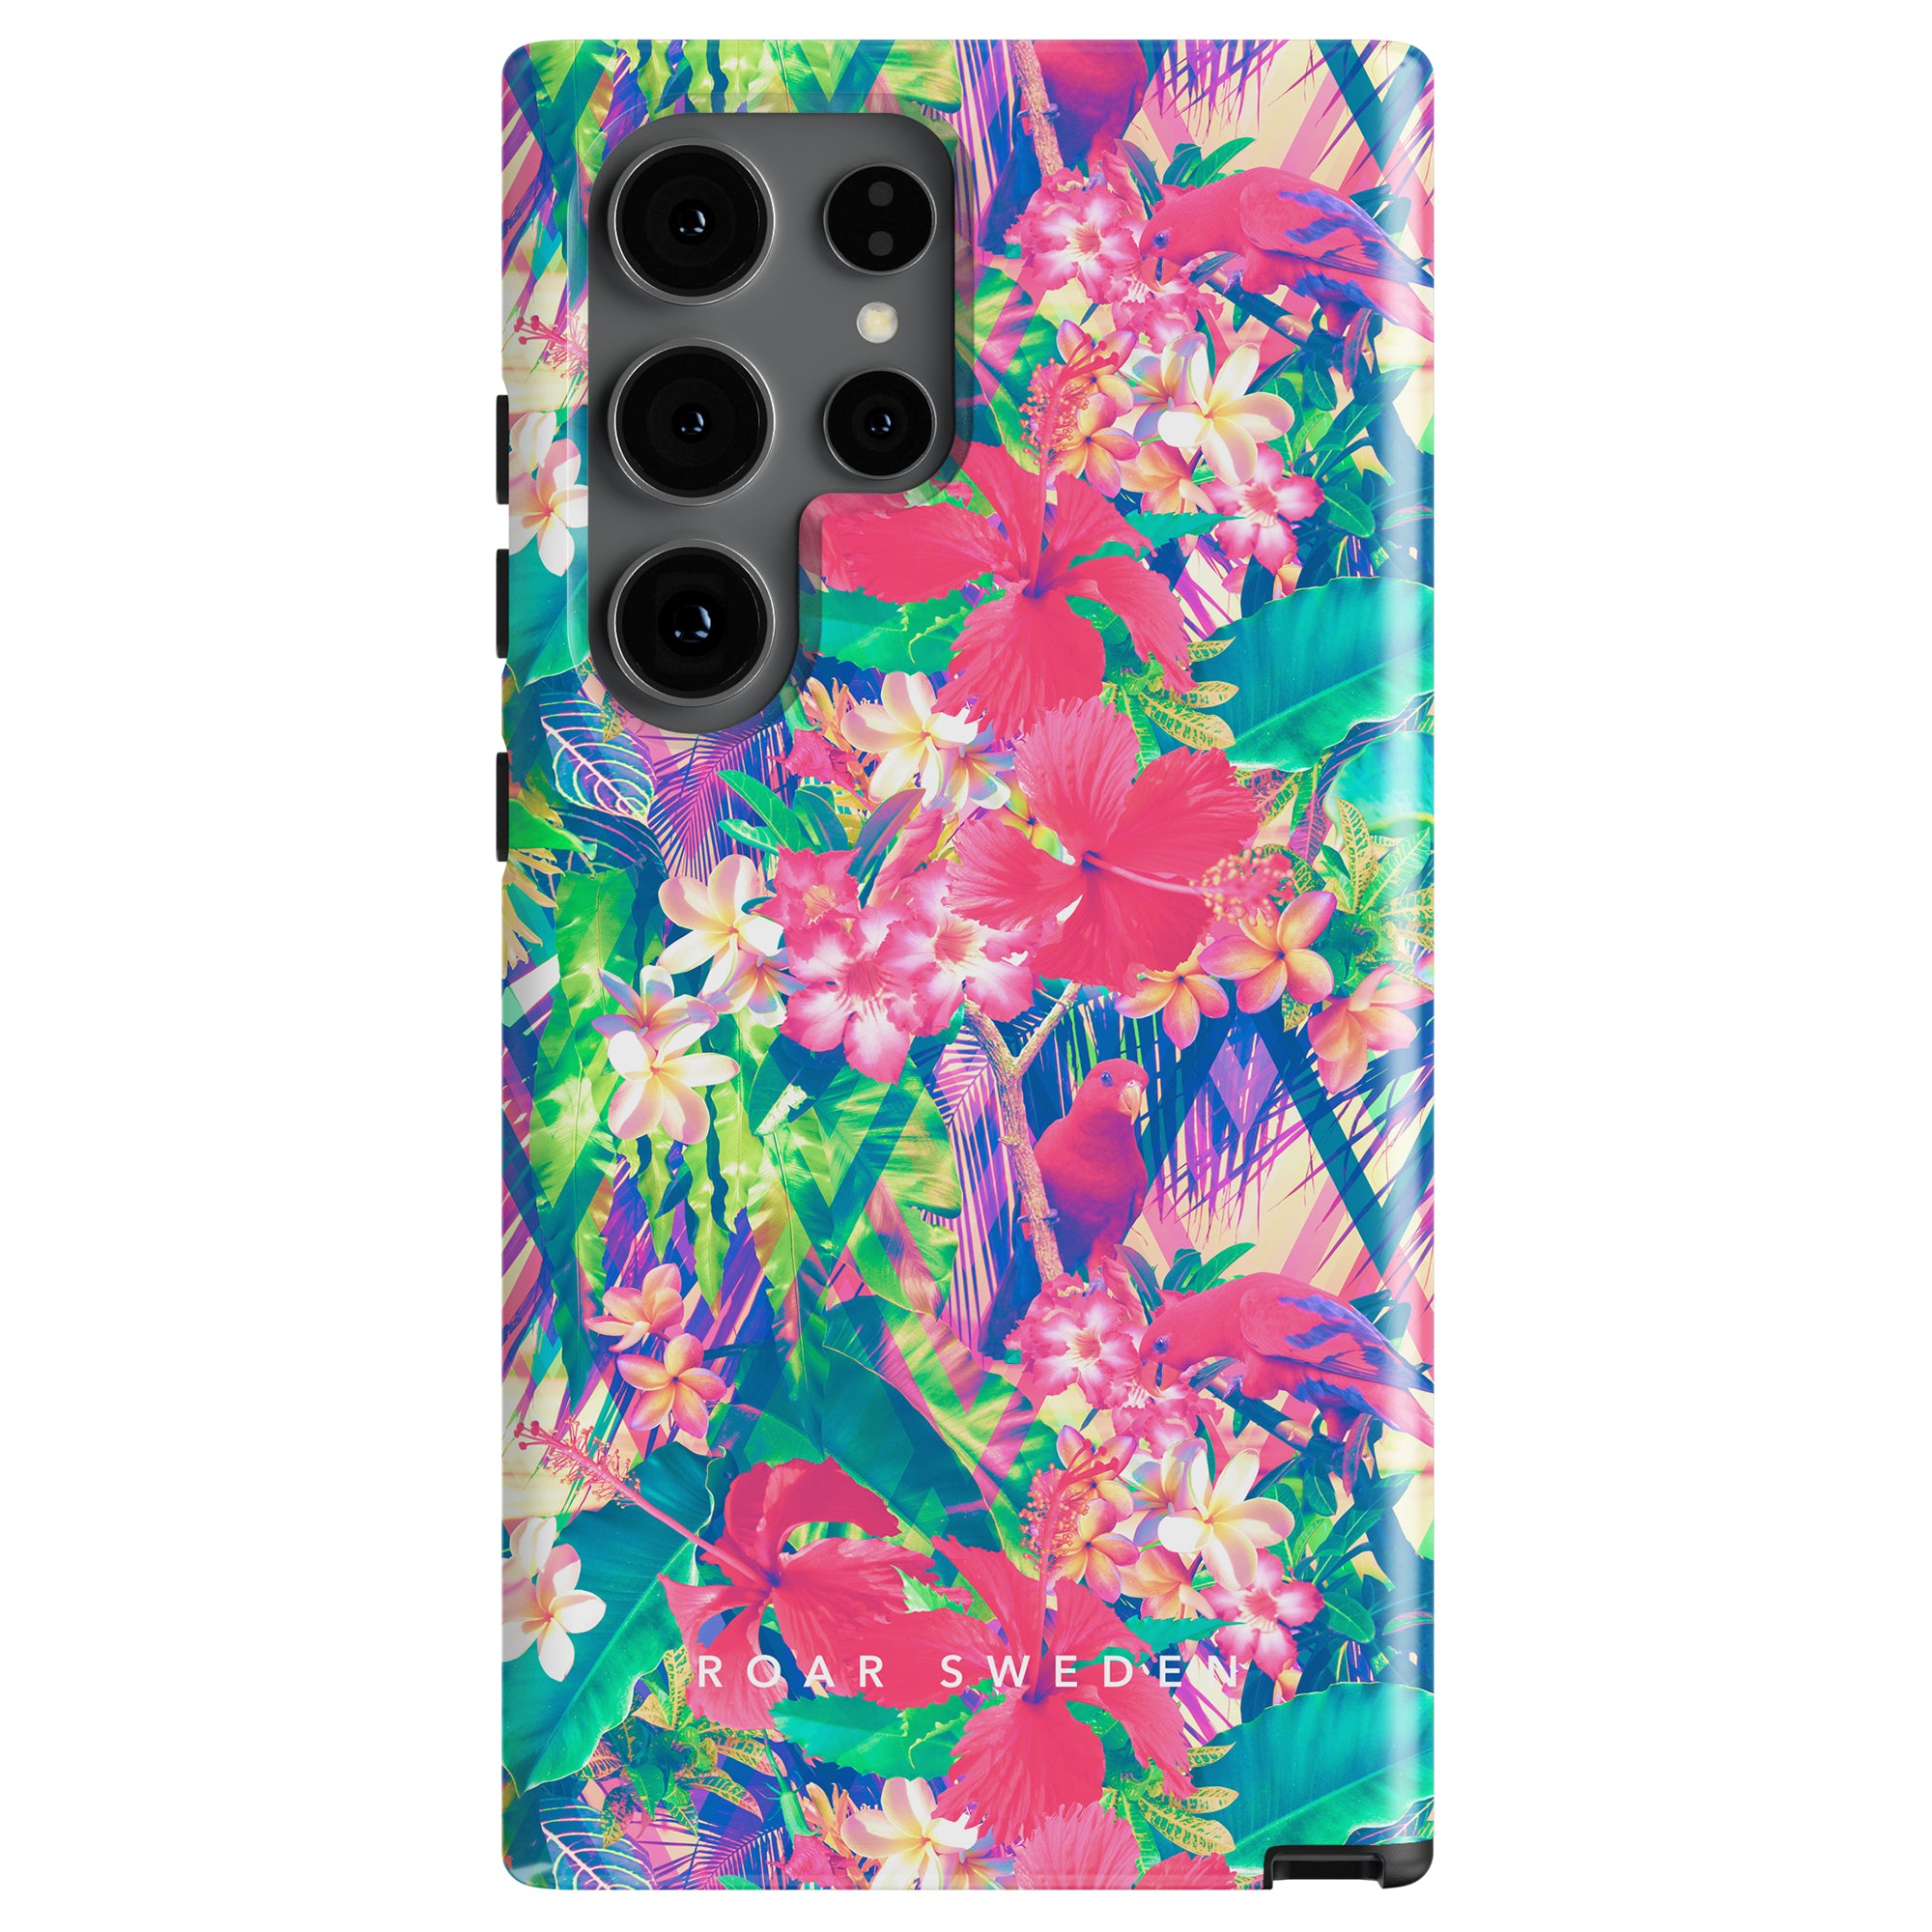 A smartphone with an orientalisk mobilskal featuring a colorful floral design in shades of pink, green, and blue, with "Lola - Tough case" written at the bottom.